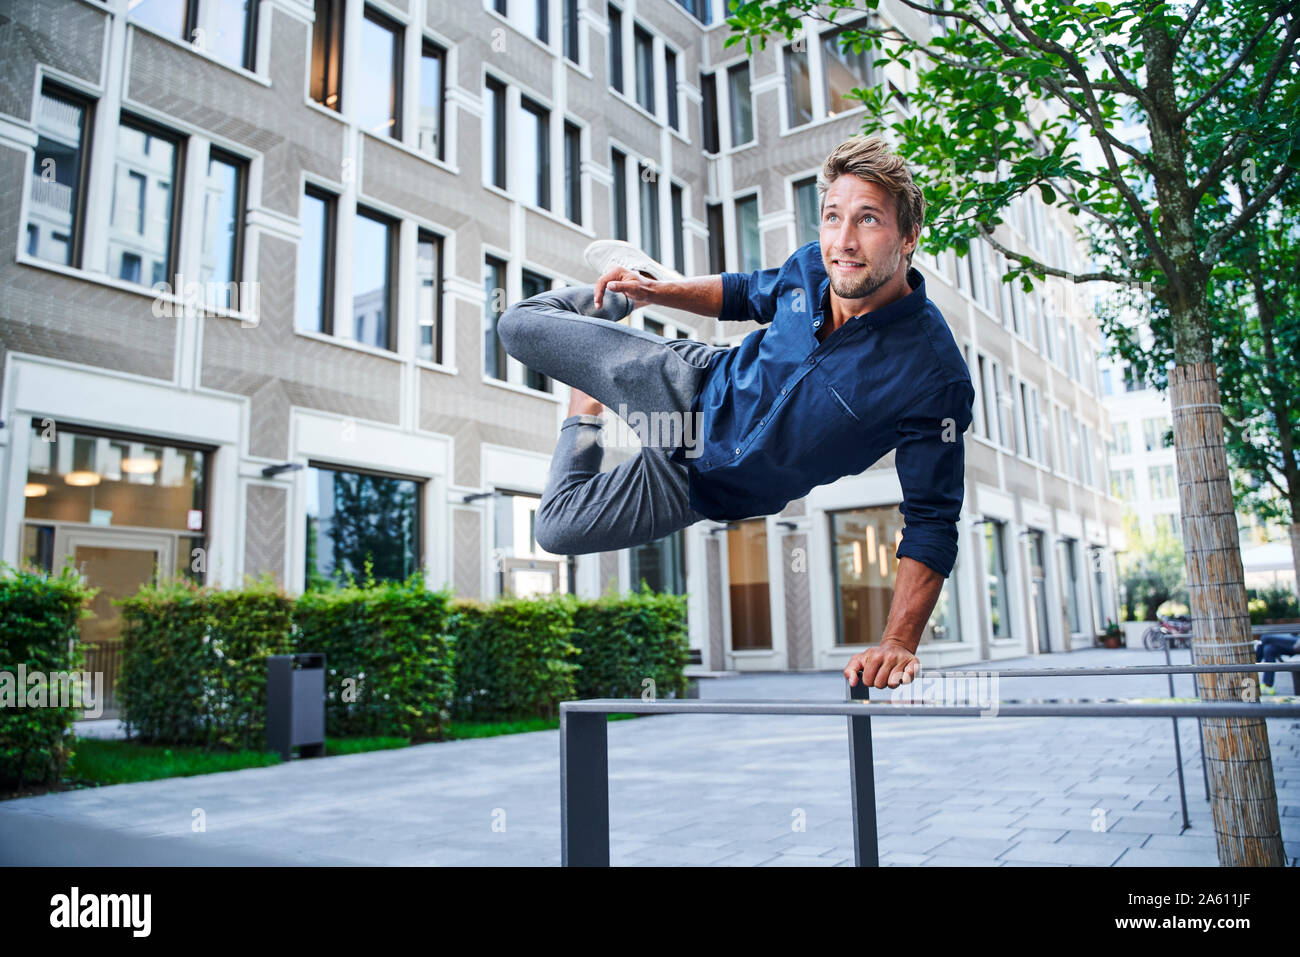 Young man jumping over railing in the city Stock Photo